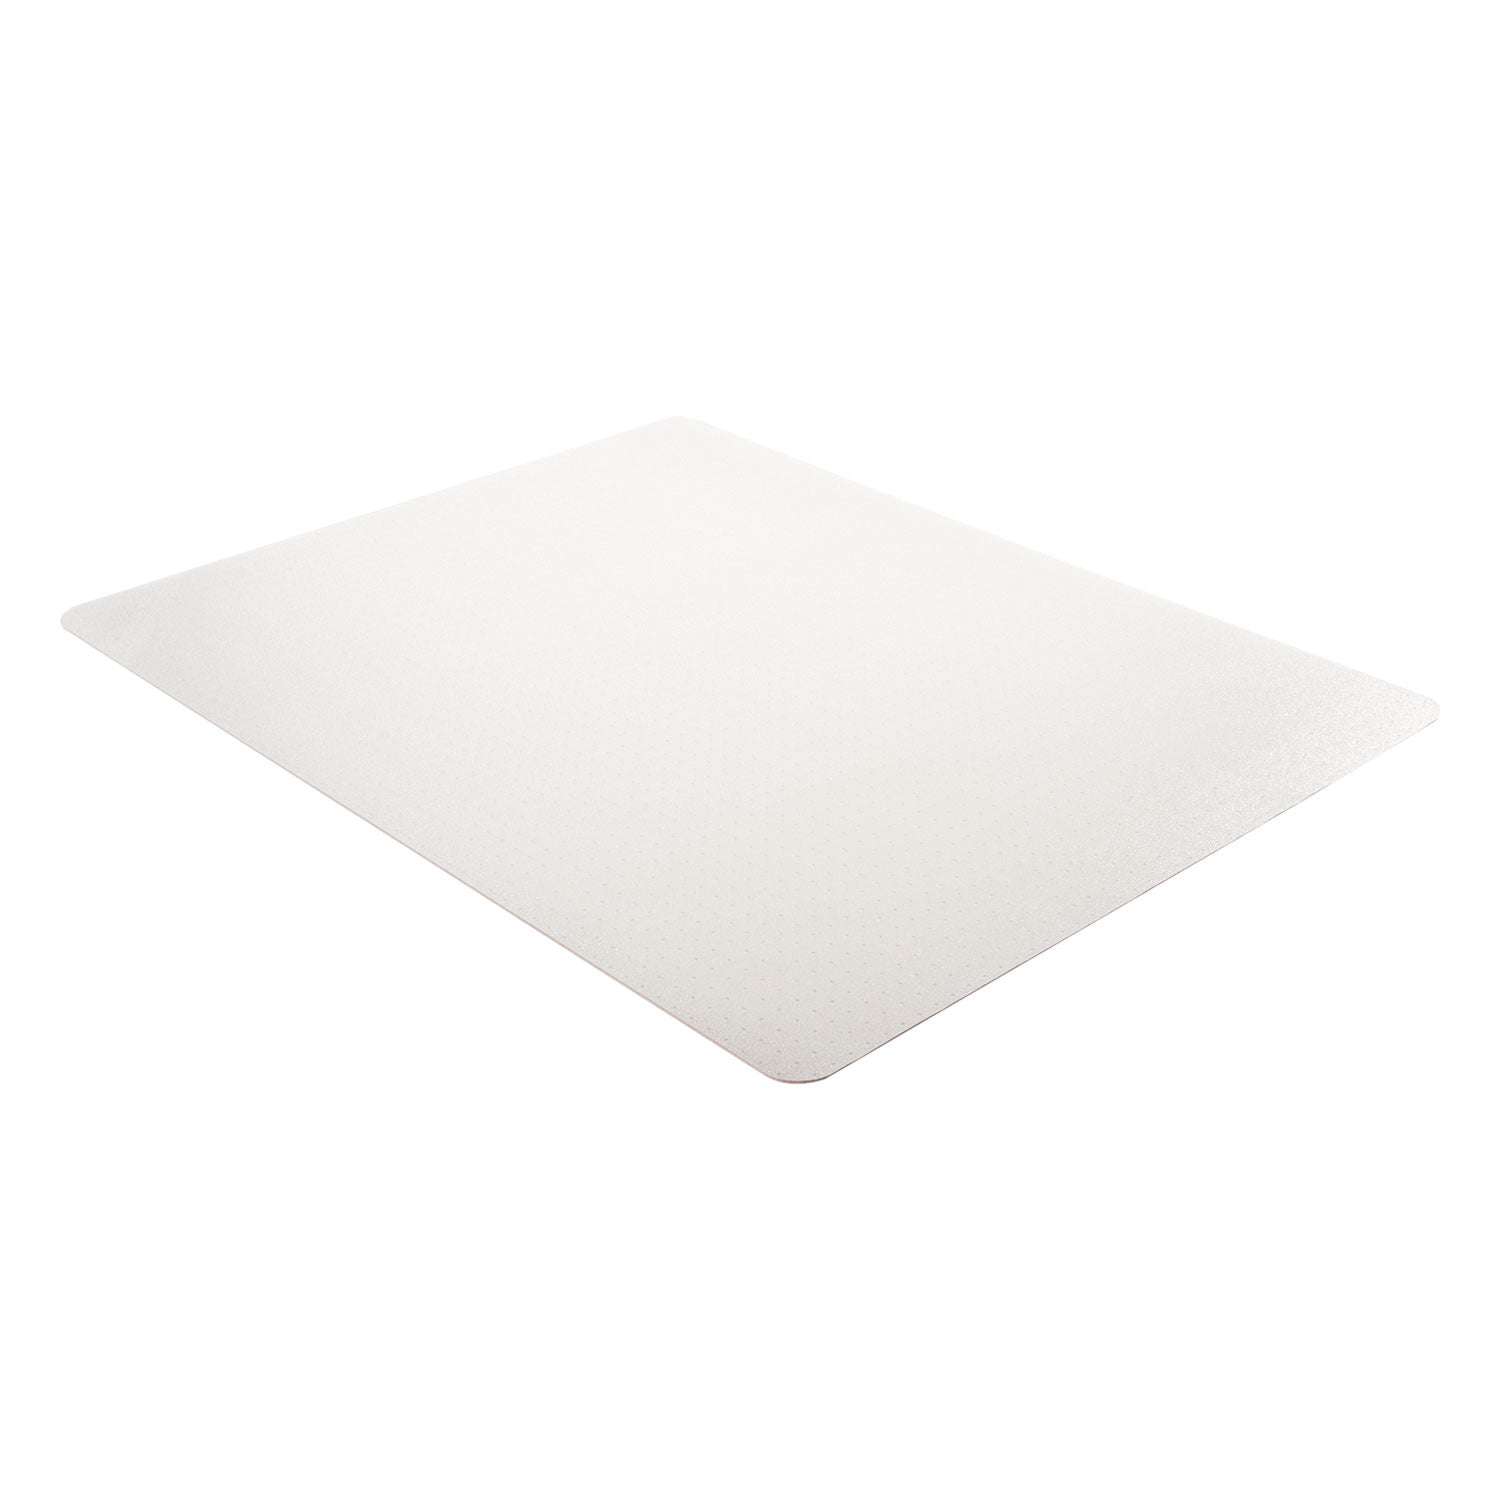 economat-occasional-use-chair-mat-low-pile-carpet-roll-46-x-60-rectangle-clear_defcm11442fcom - 7